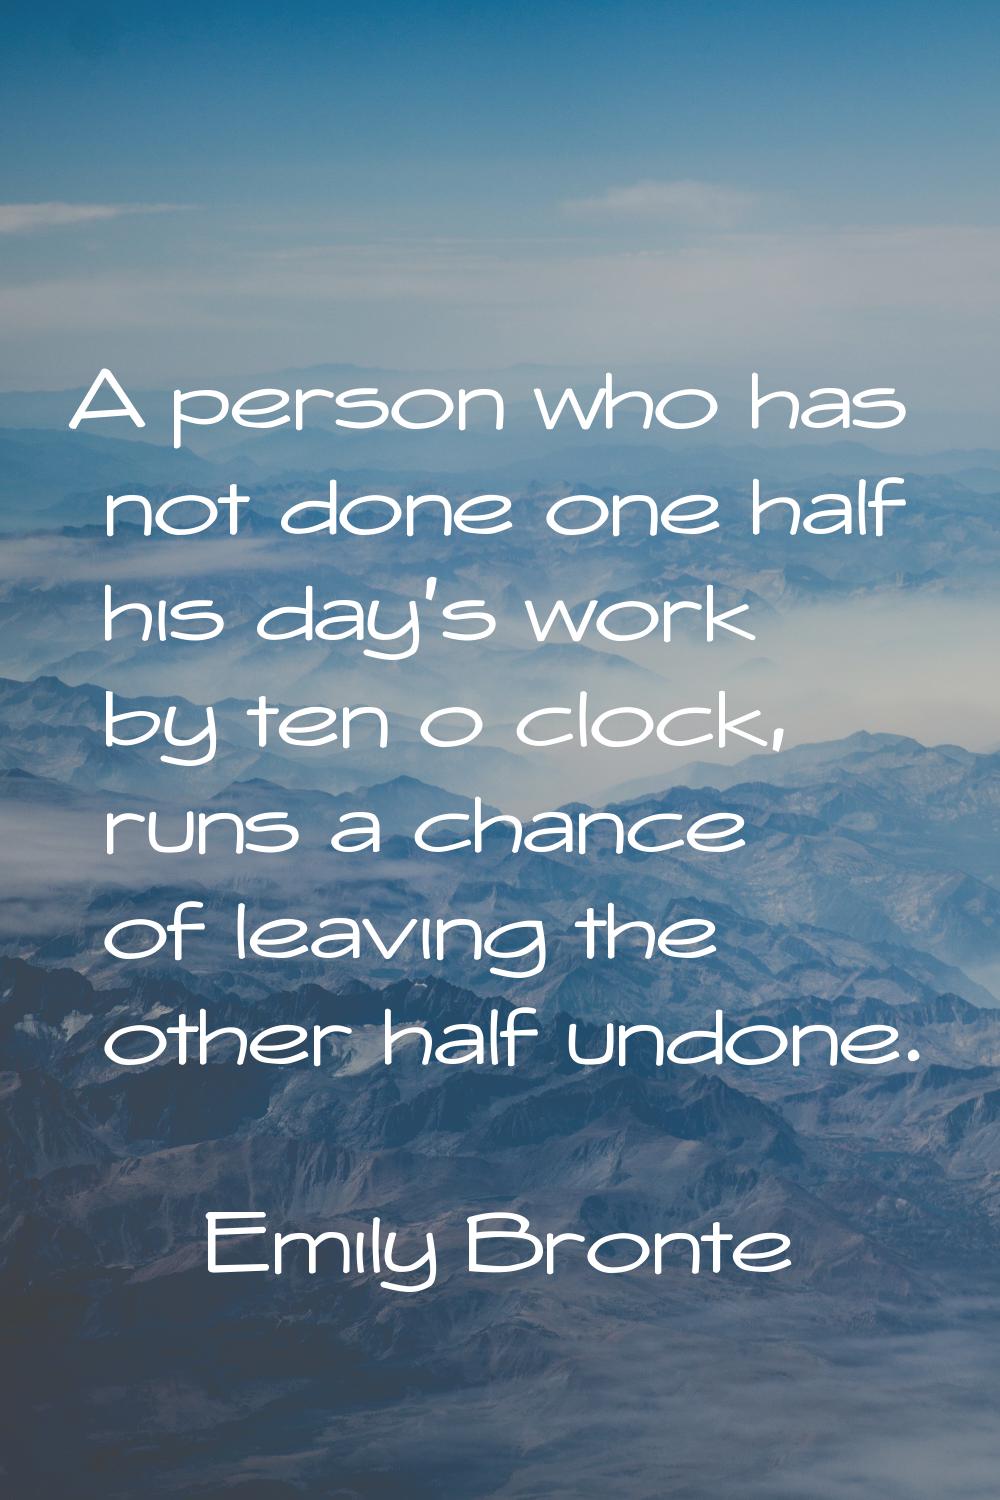 A person who has not done one half his day's work by ten o clock, runs a chance of leaving the othe